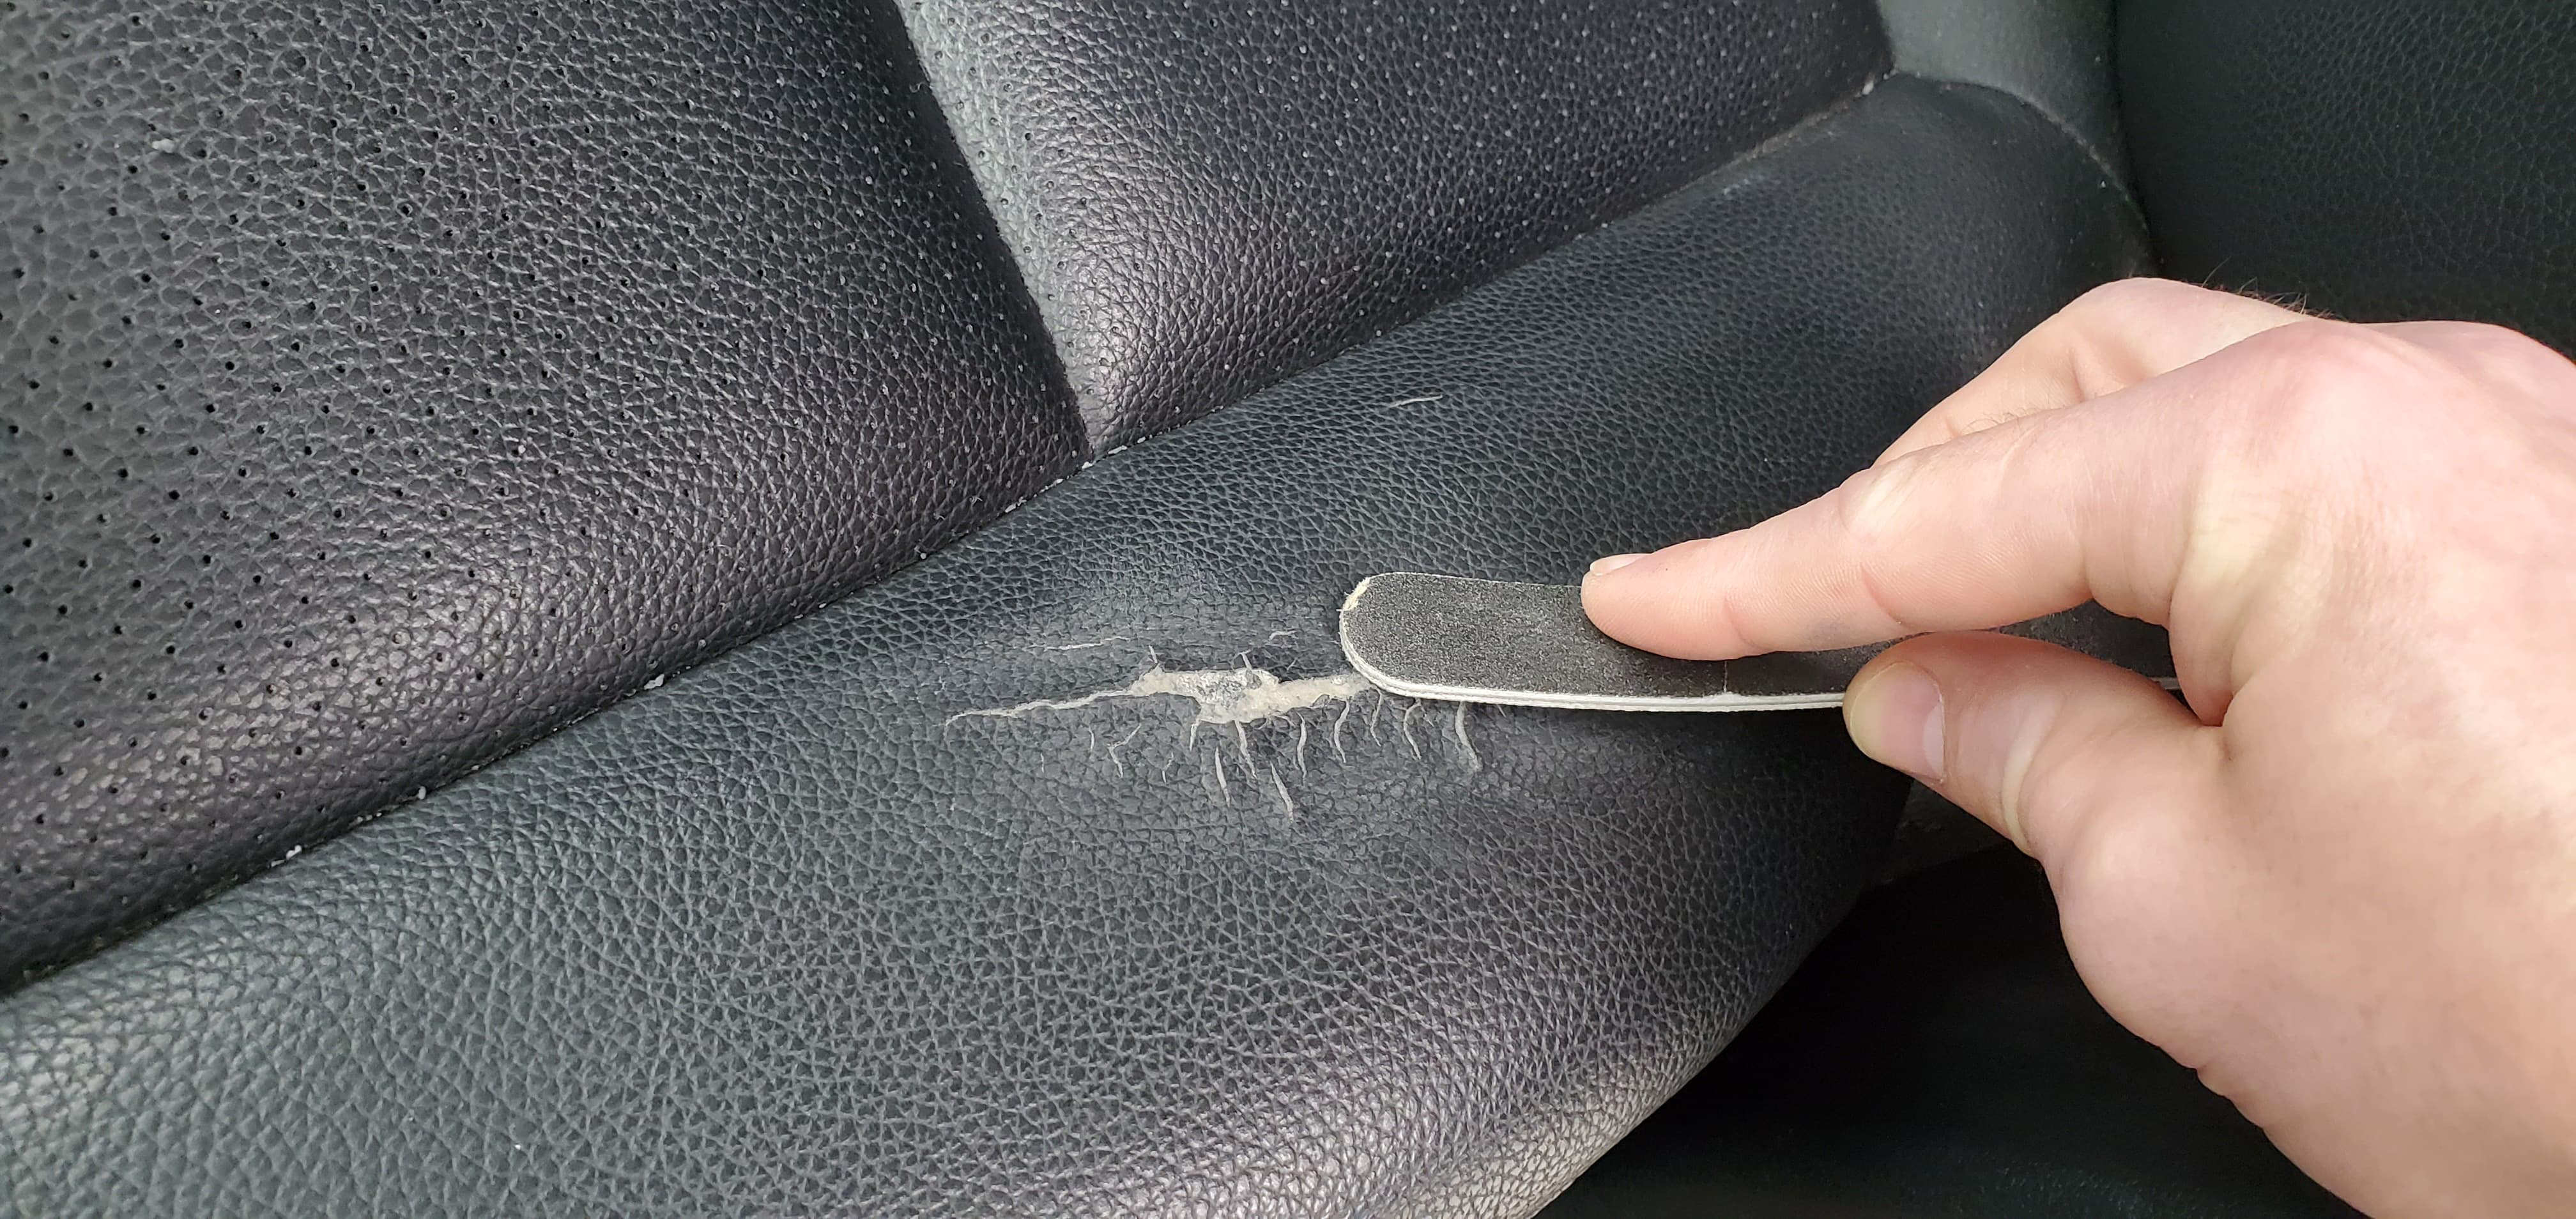 How To Repair A Leather Car Seat - How To Repair Small Hole In Vinyl Car Seat